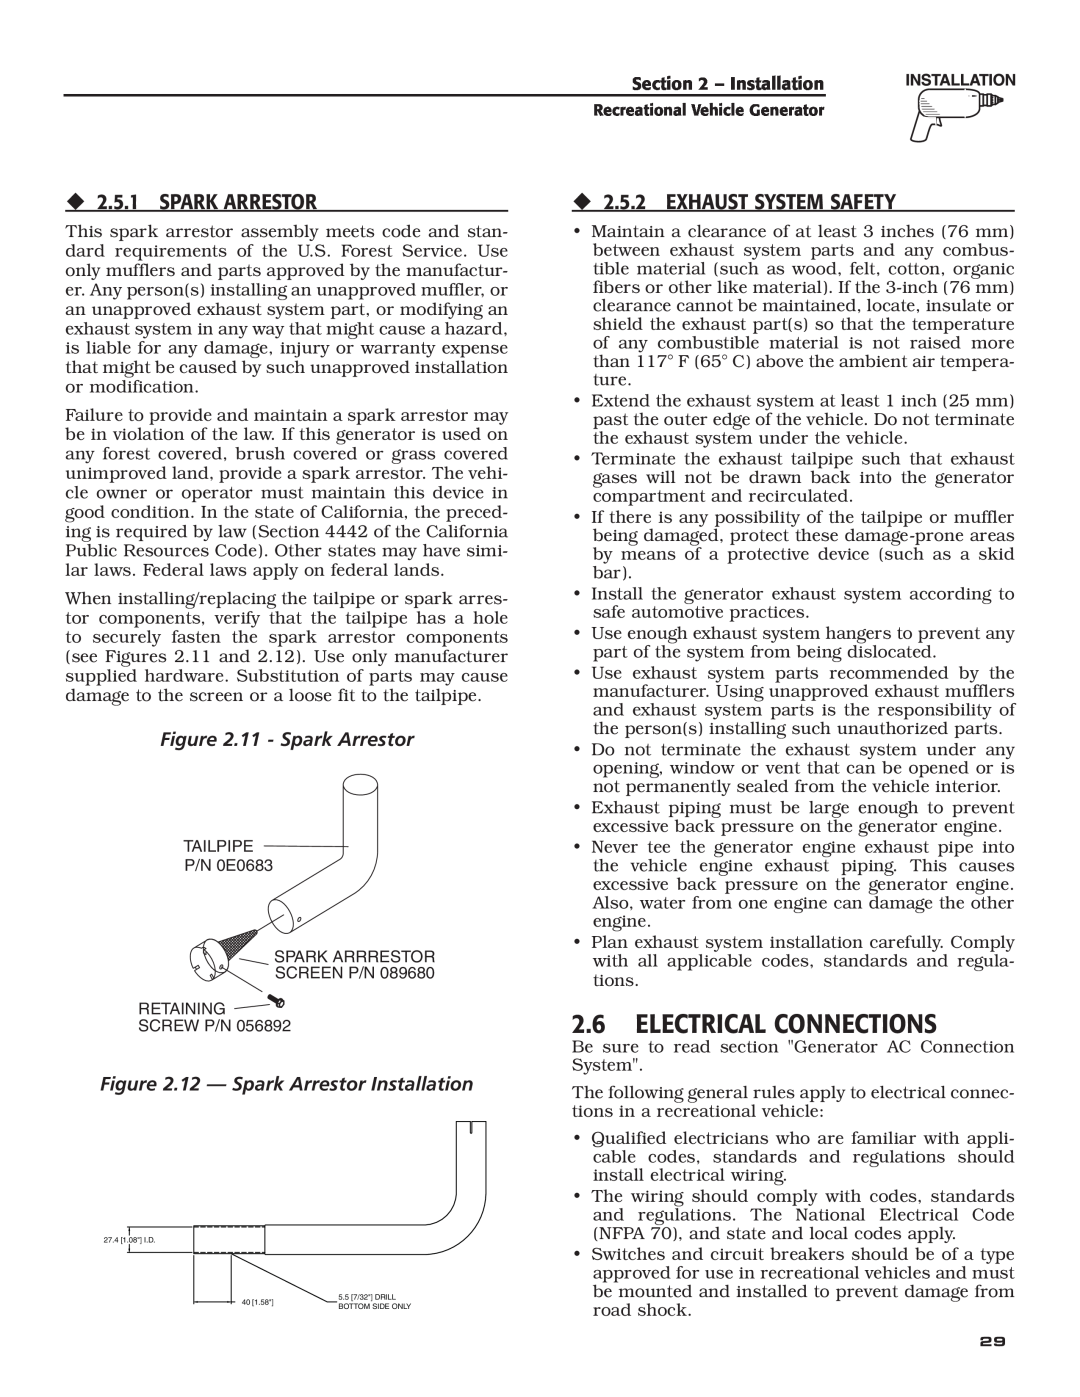 Generac Power Systems 004701-0 owner manual 2.6ELECTRICAL CONNECTIONS, ‹2.5.1 SPARK ARRESTOR, ‹2.5.2 EXHAUST SYSTEM SAFETY 